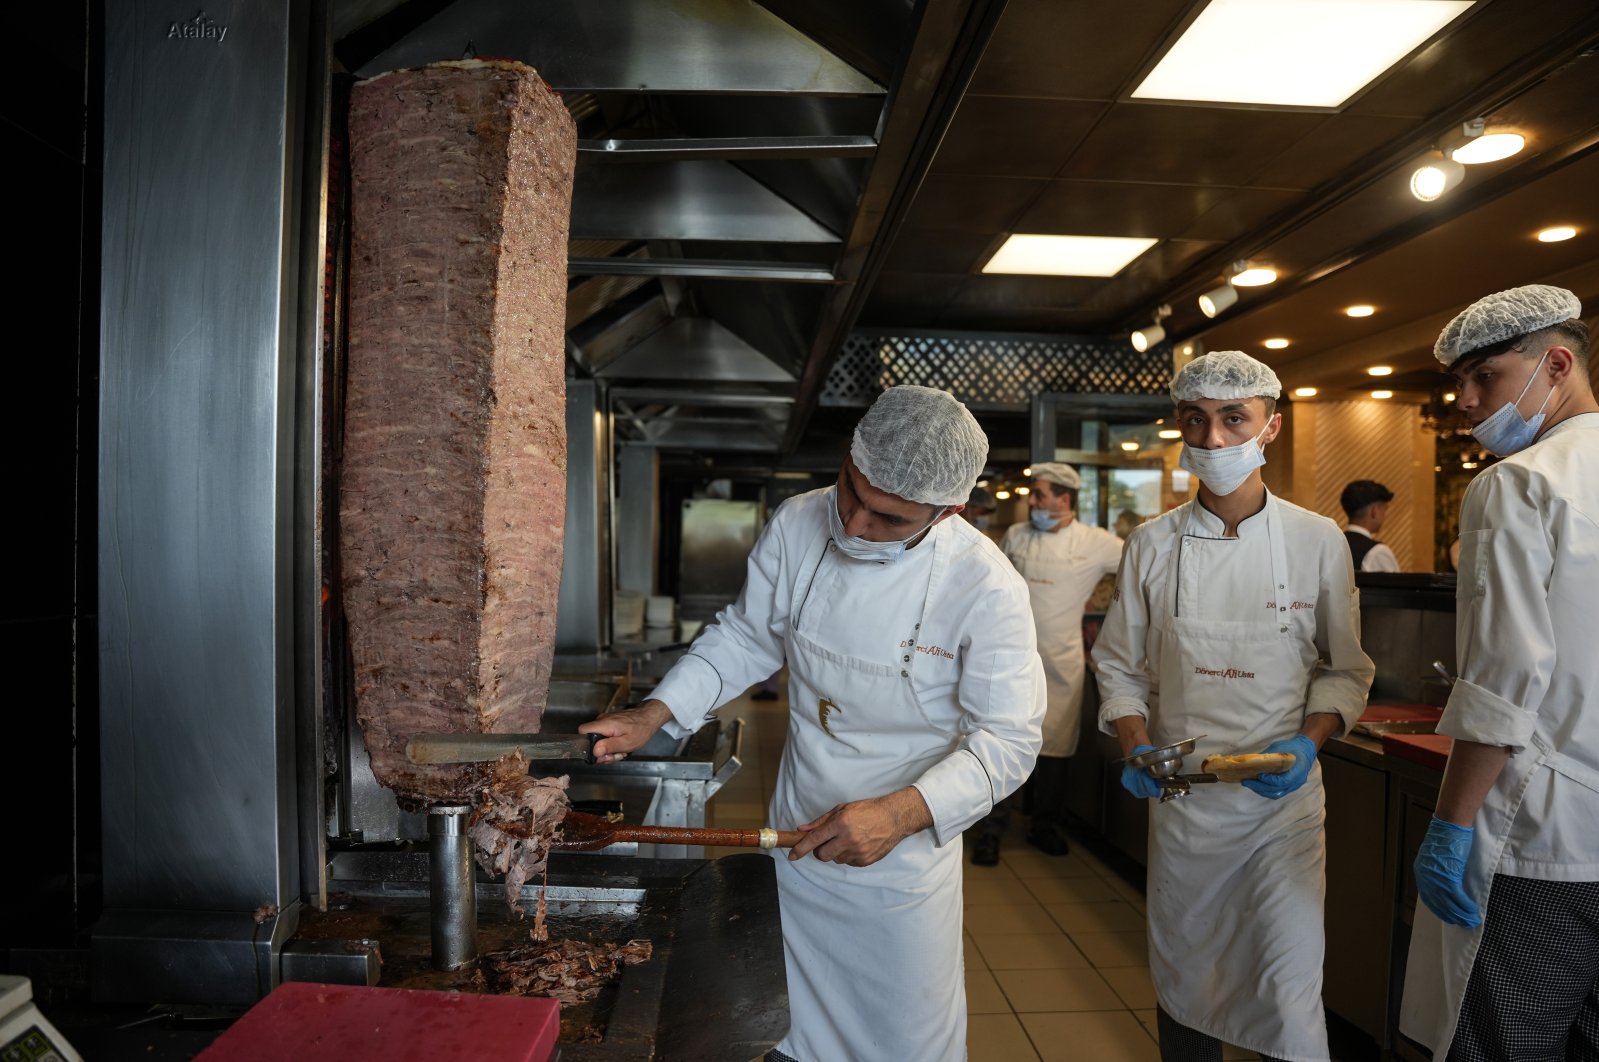 &quot;The announcement indicated that döner has been spreading from Istanbul to various cities across the Ottoman territories since the early 1800s, where it has been cooked and sold in both restaurants and inns.&quot; (IHA Photo)